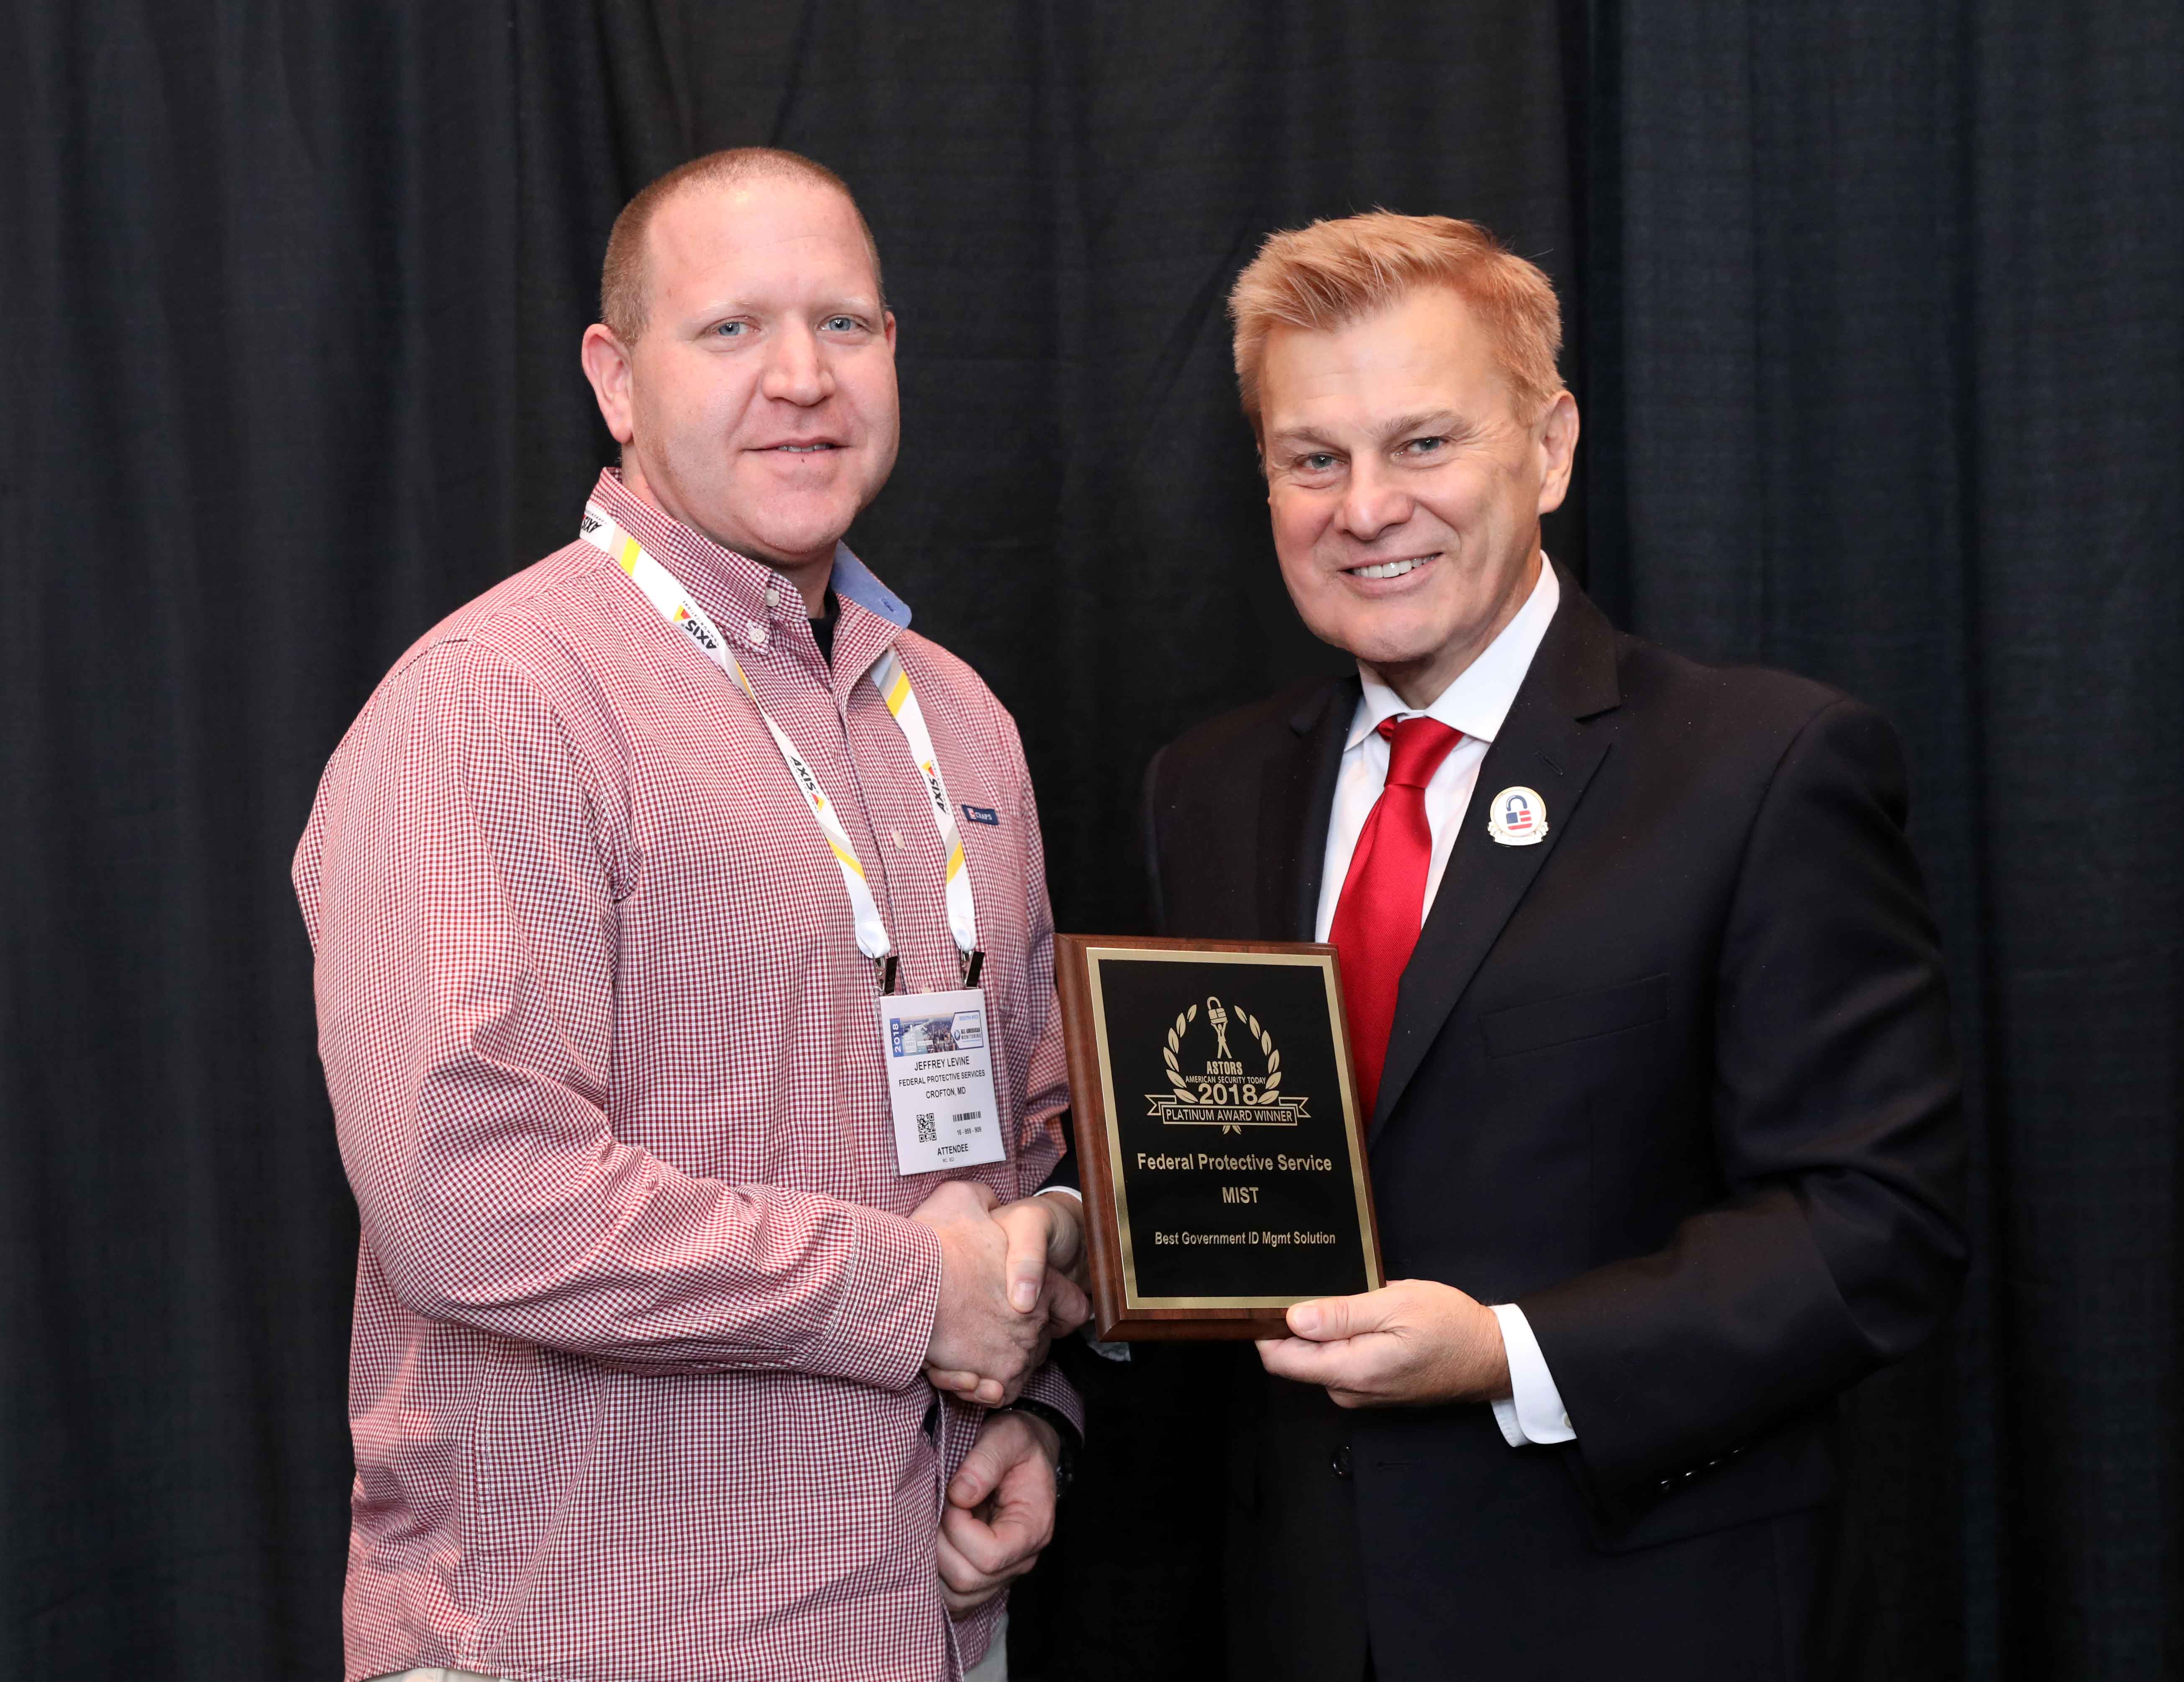 Jeffrey Levine, Director, Federal Protective Service (FPS) accepting 2018 'ASTORS' Award at ISC East